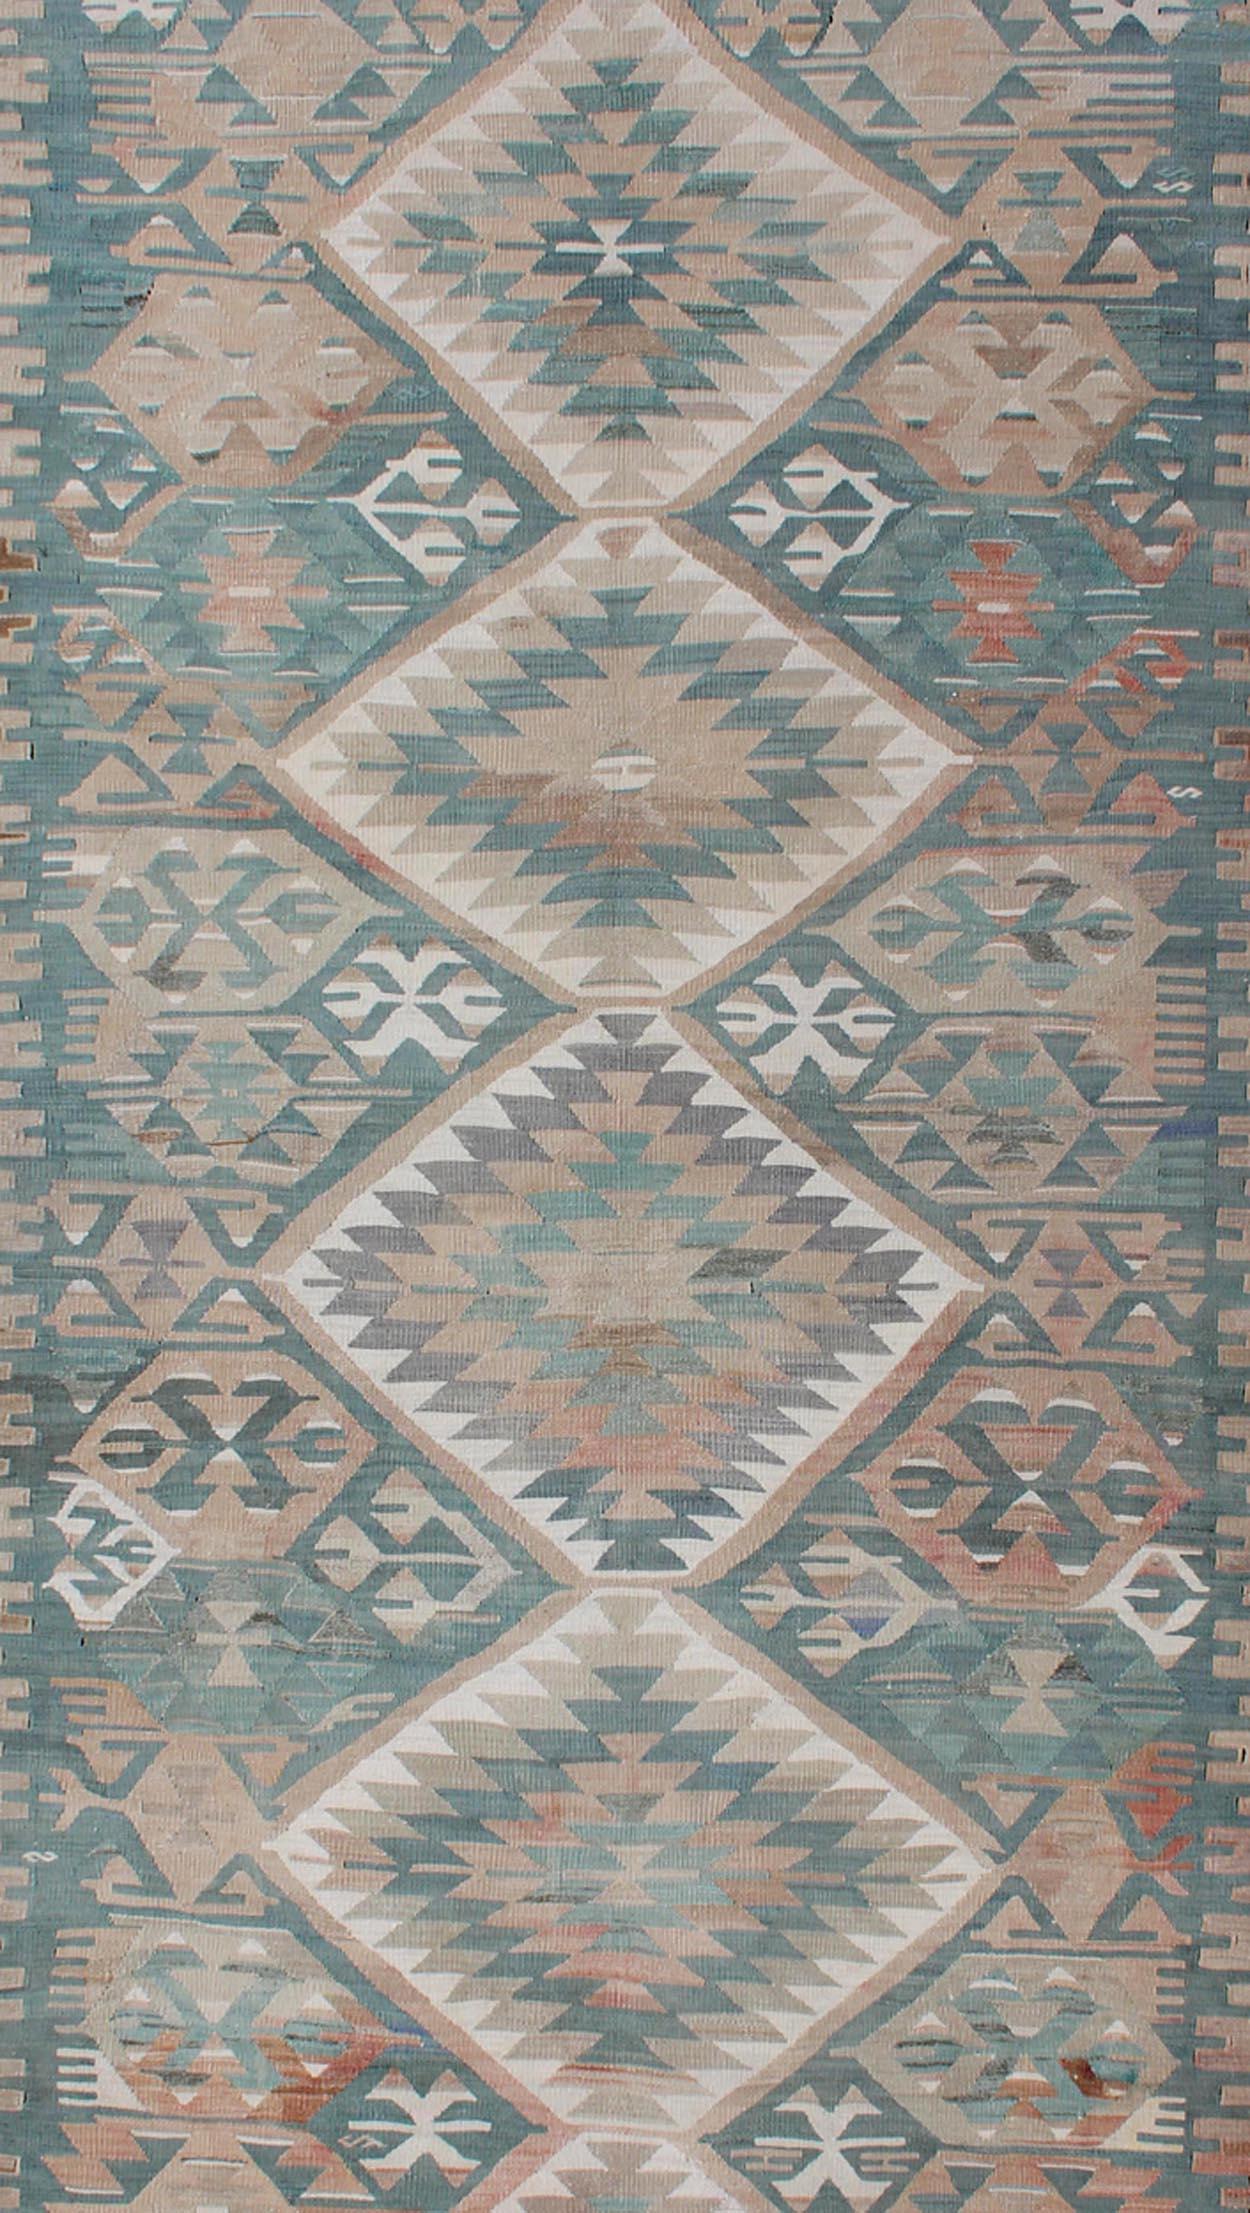 Geometric design vintage Kilim rug from Turkey in light teal and tan, light green neutral tones, rug EN-179073, country of origin / type: Turkey / Kilim, circa 1950.

Featuring a beautiful geometric design rendered in various color tones, this